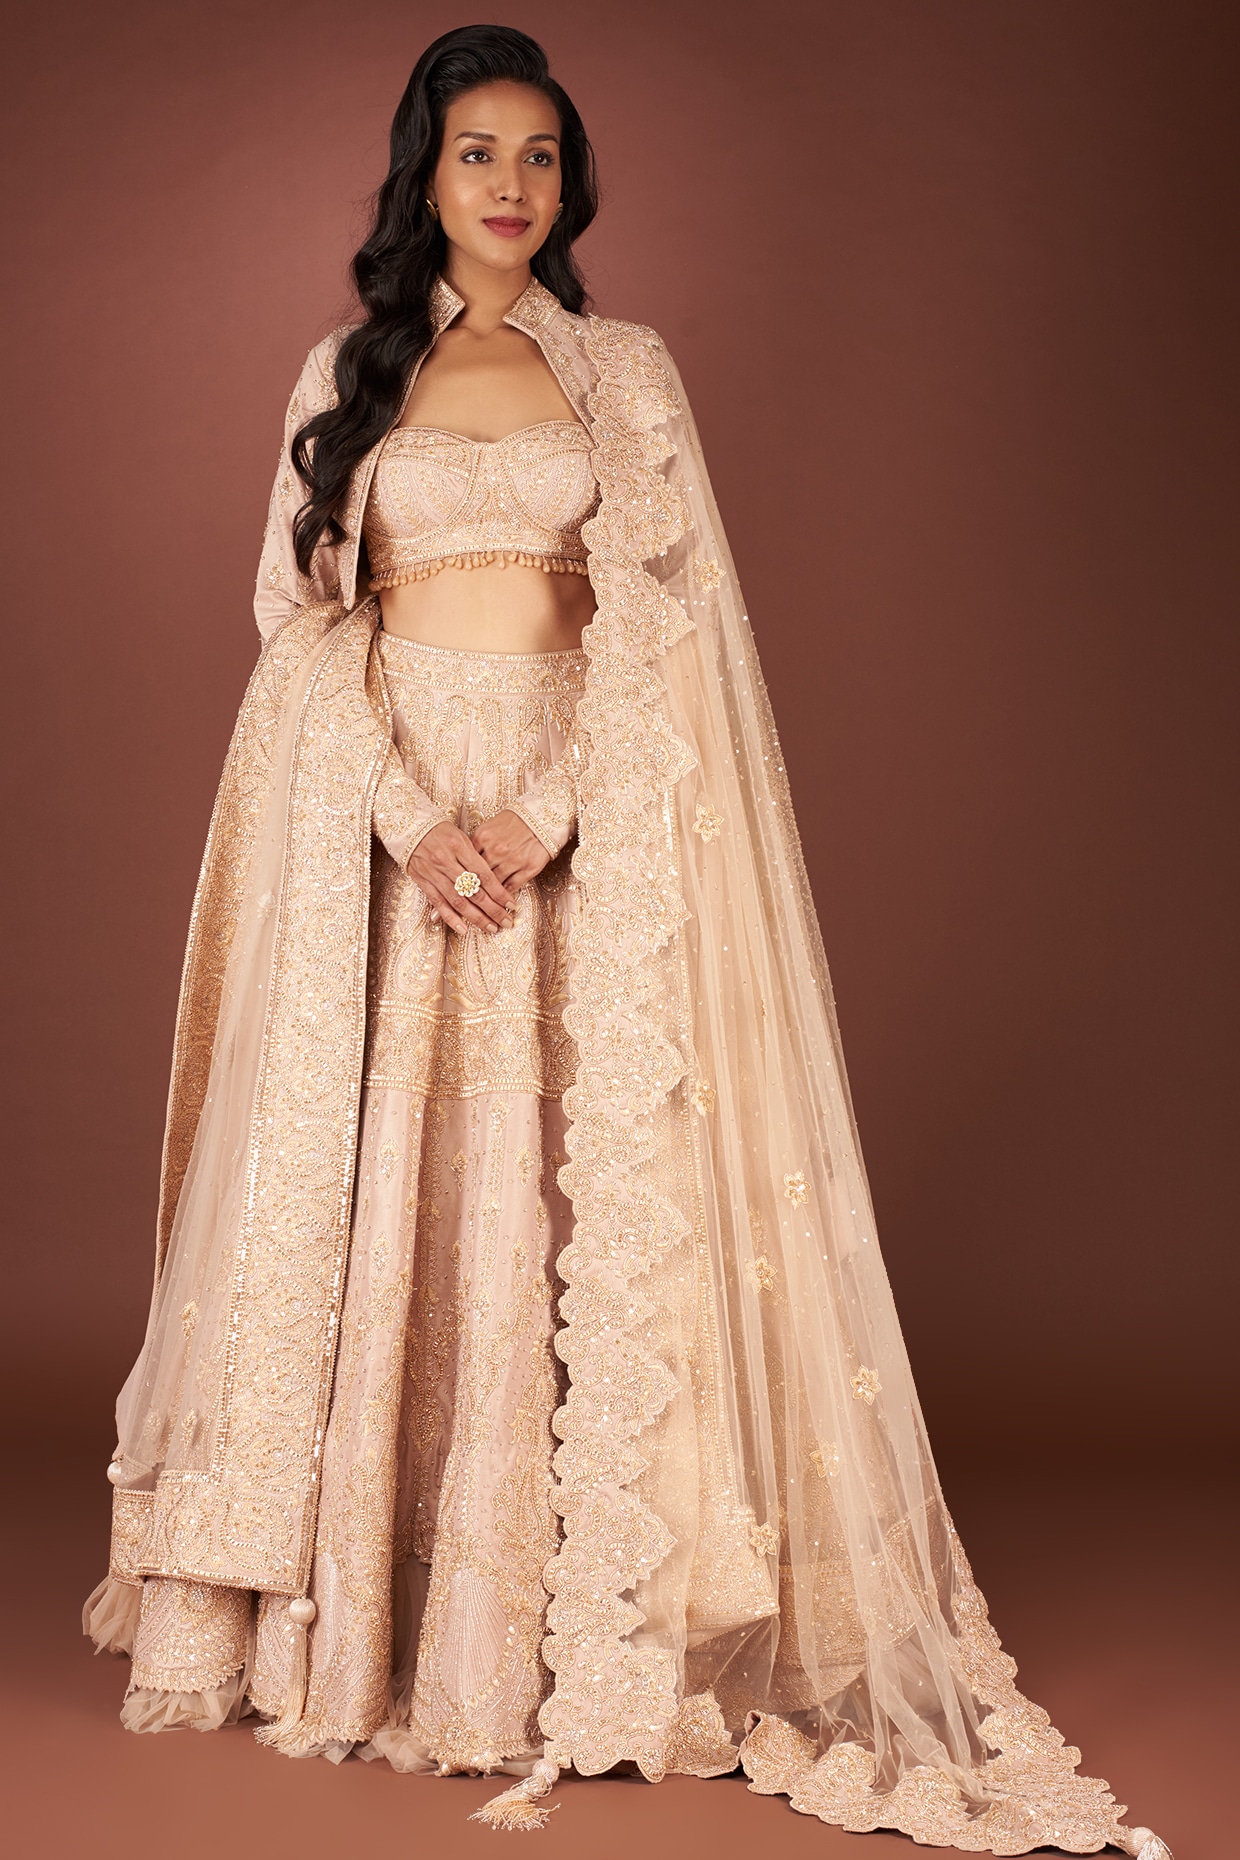 Lehengas with Short Jackets are All the Vogue in 2020. Get in on the Trend  with the Ultimate Lehengas with Short and Chic Jackets!